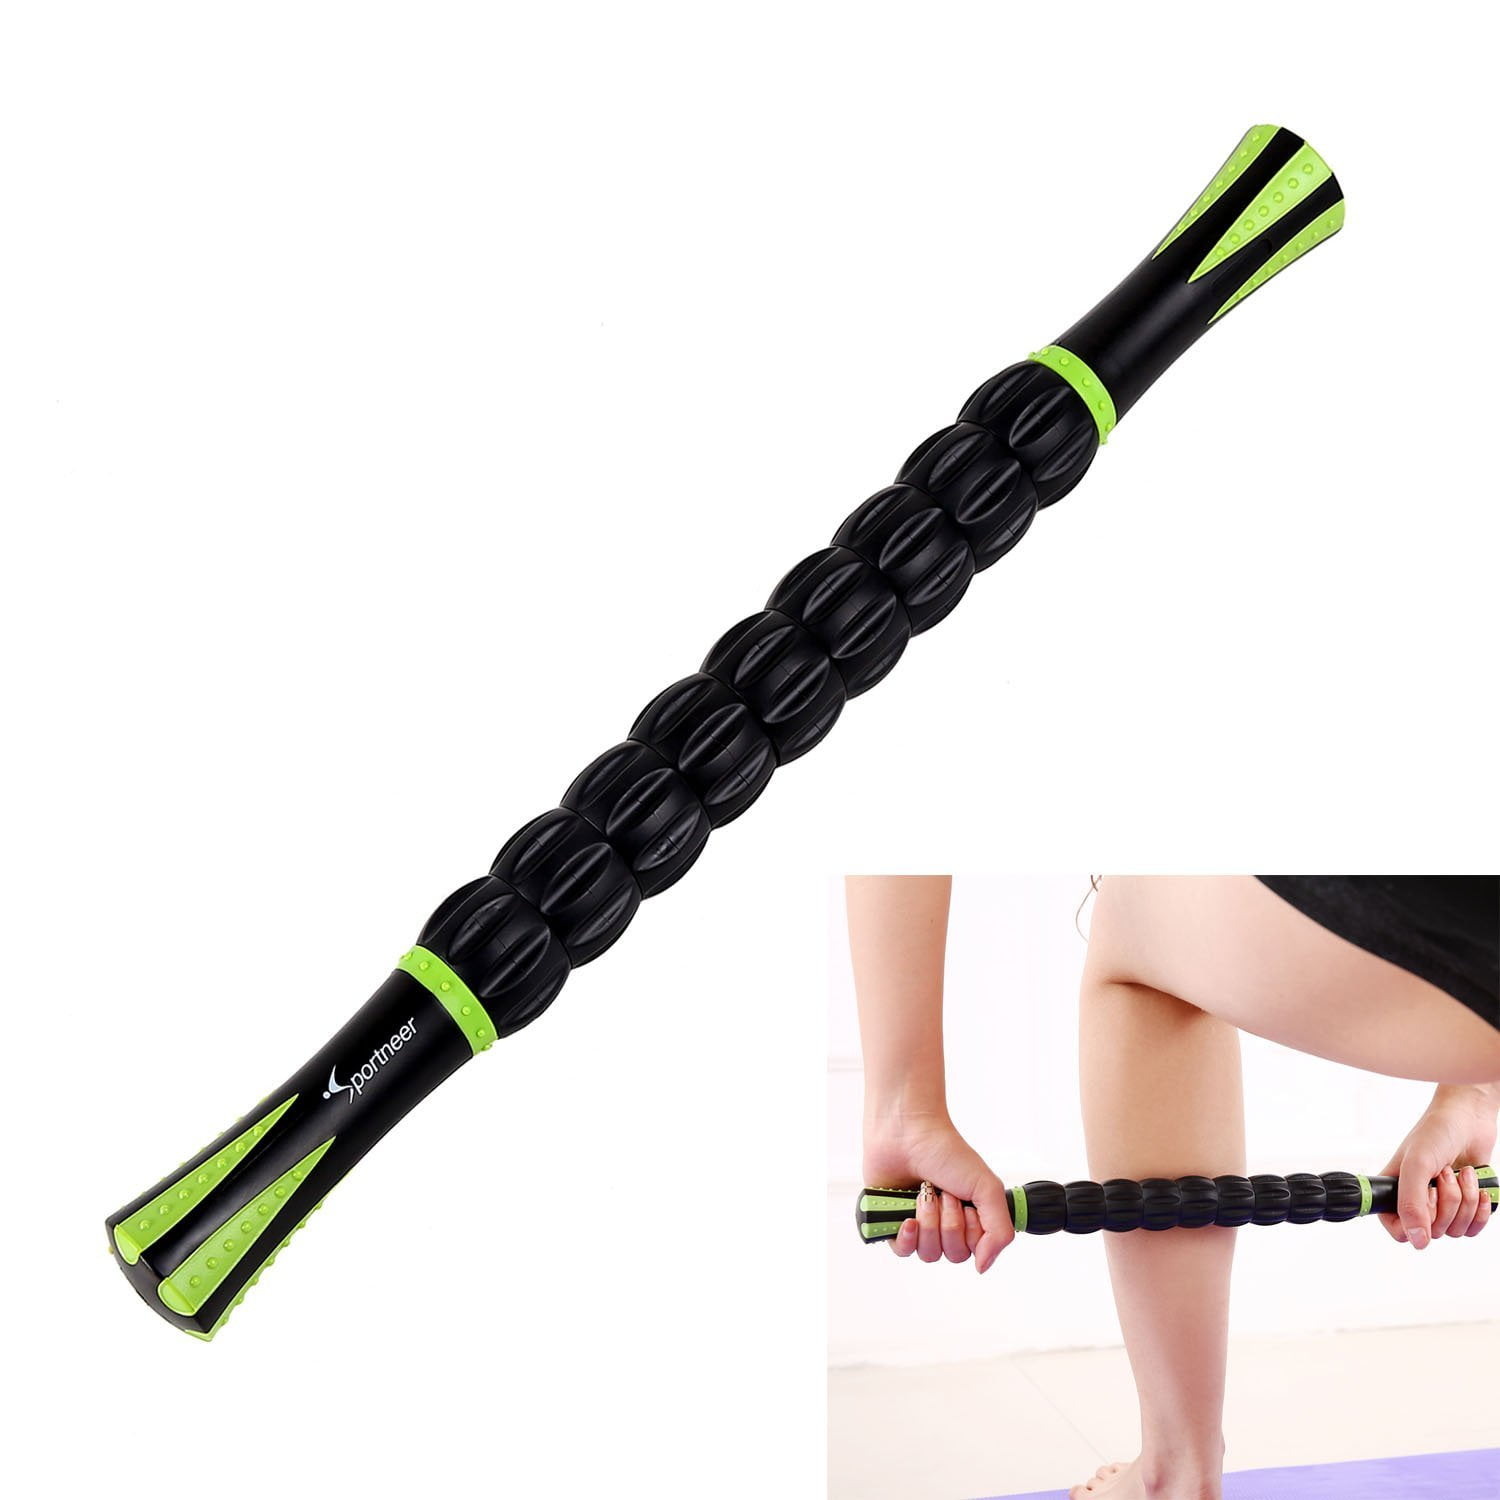 Sportneer Muscle Roller Stick Back Leg Calf Massage Sticks for Athletes, Massager Tool for Reducing Muscle Soreness, Loosing Tightness and Soothing Cramps